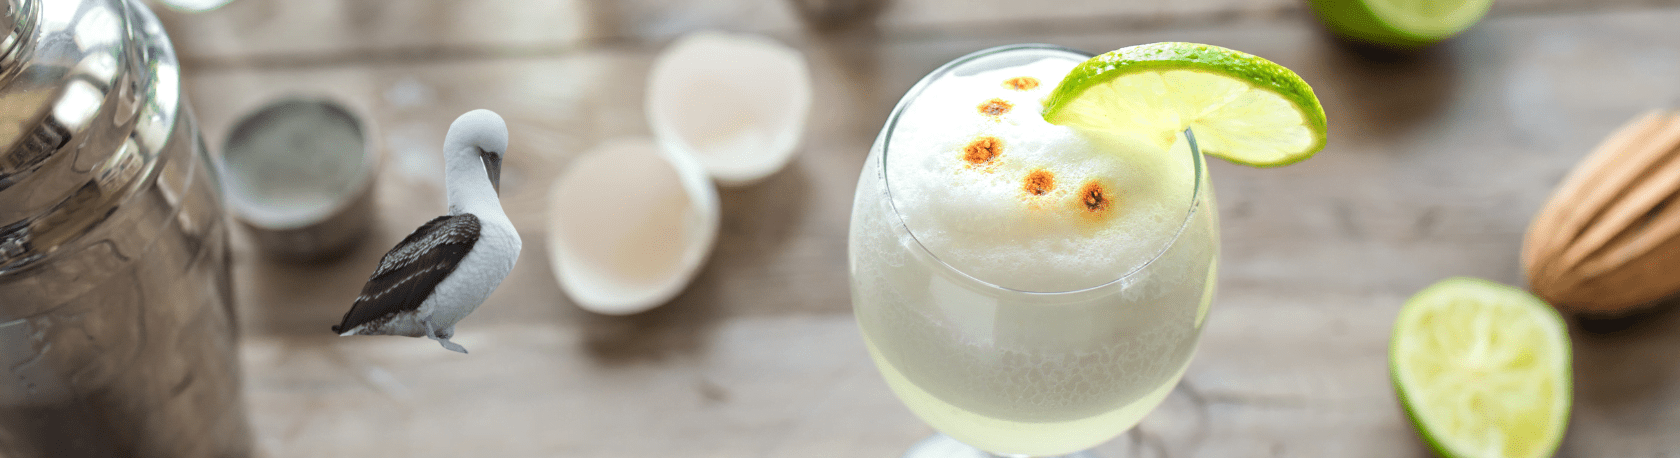 Enhance your Spanish vocabulary and cultural knowledge while learning about the origins of the word 'pisco' - Easy Español - Speak Spanish now!